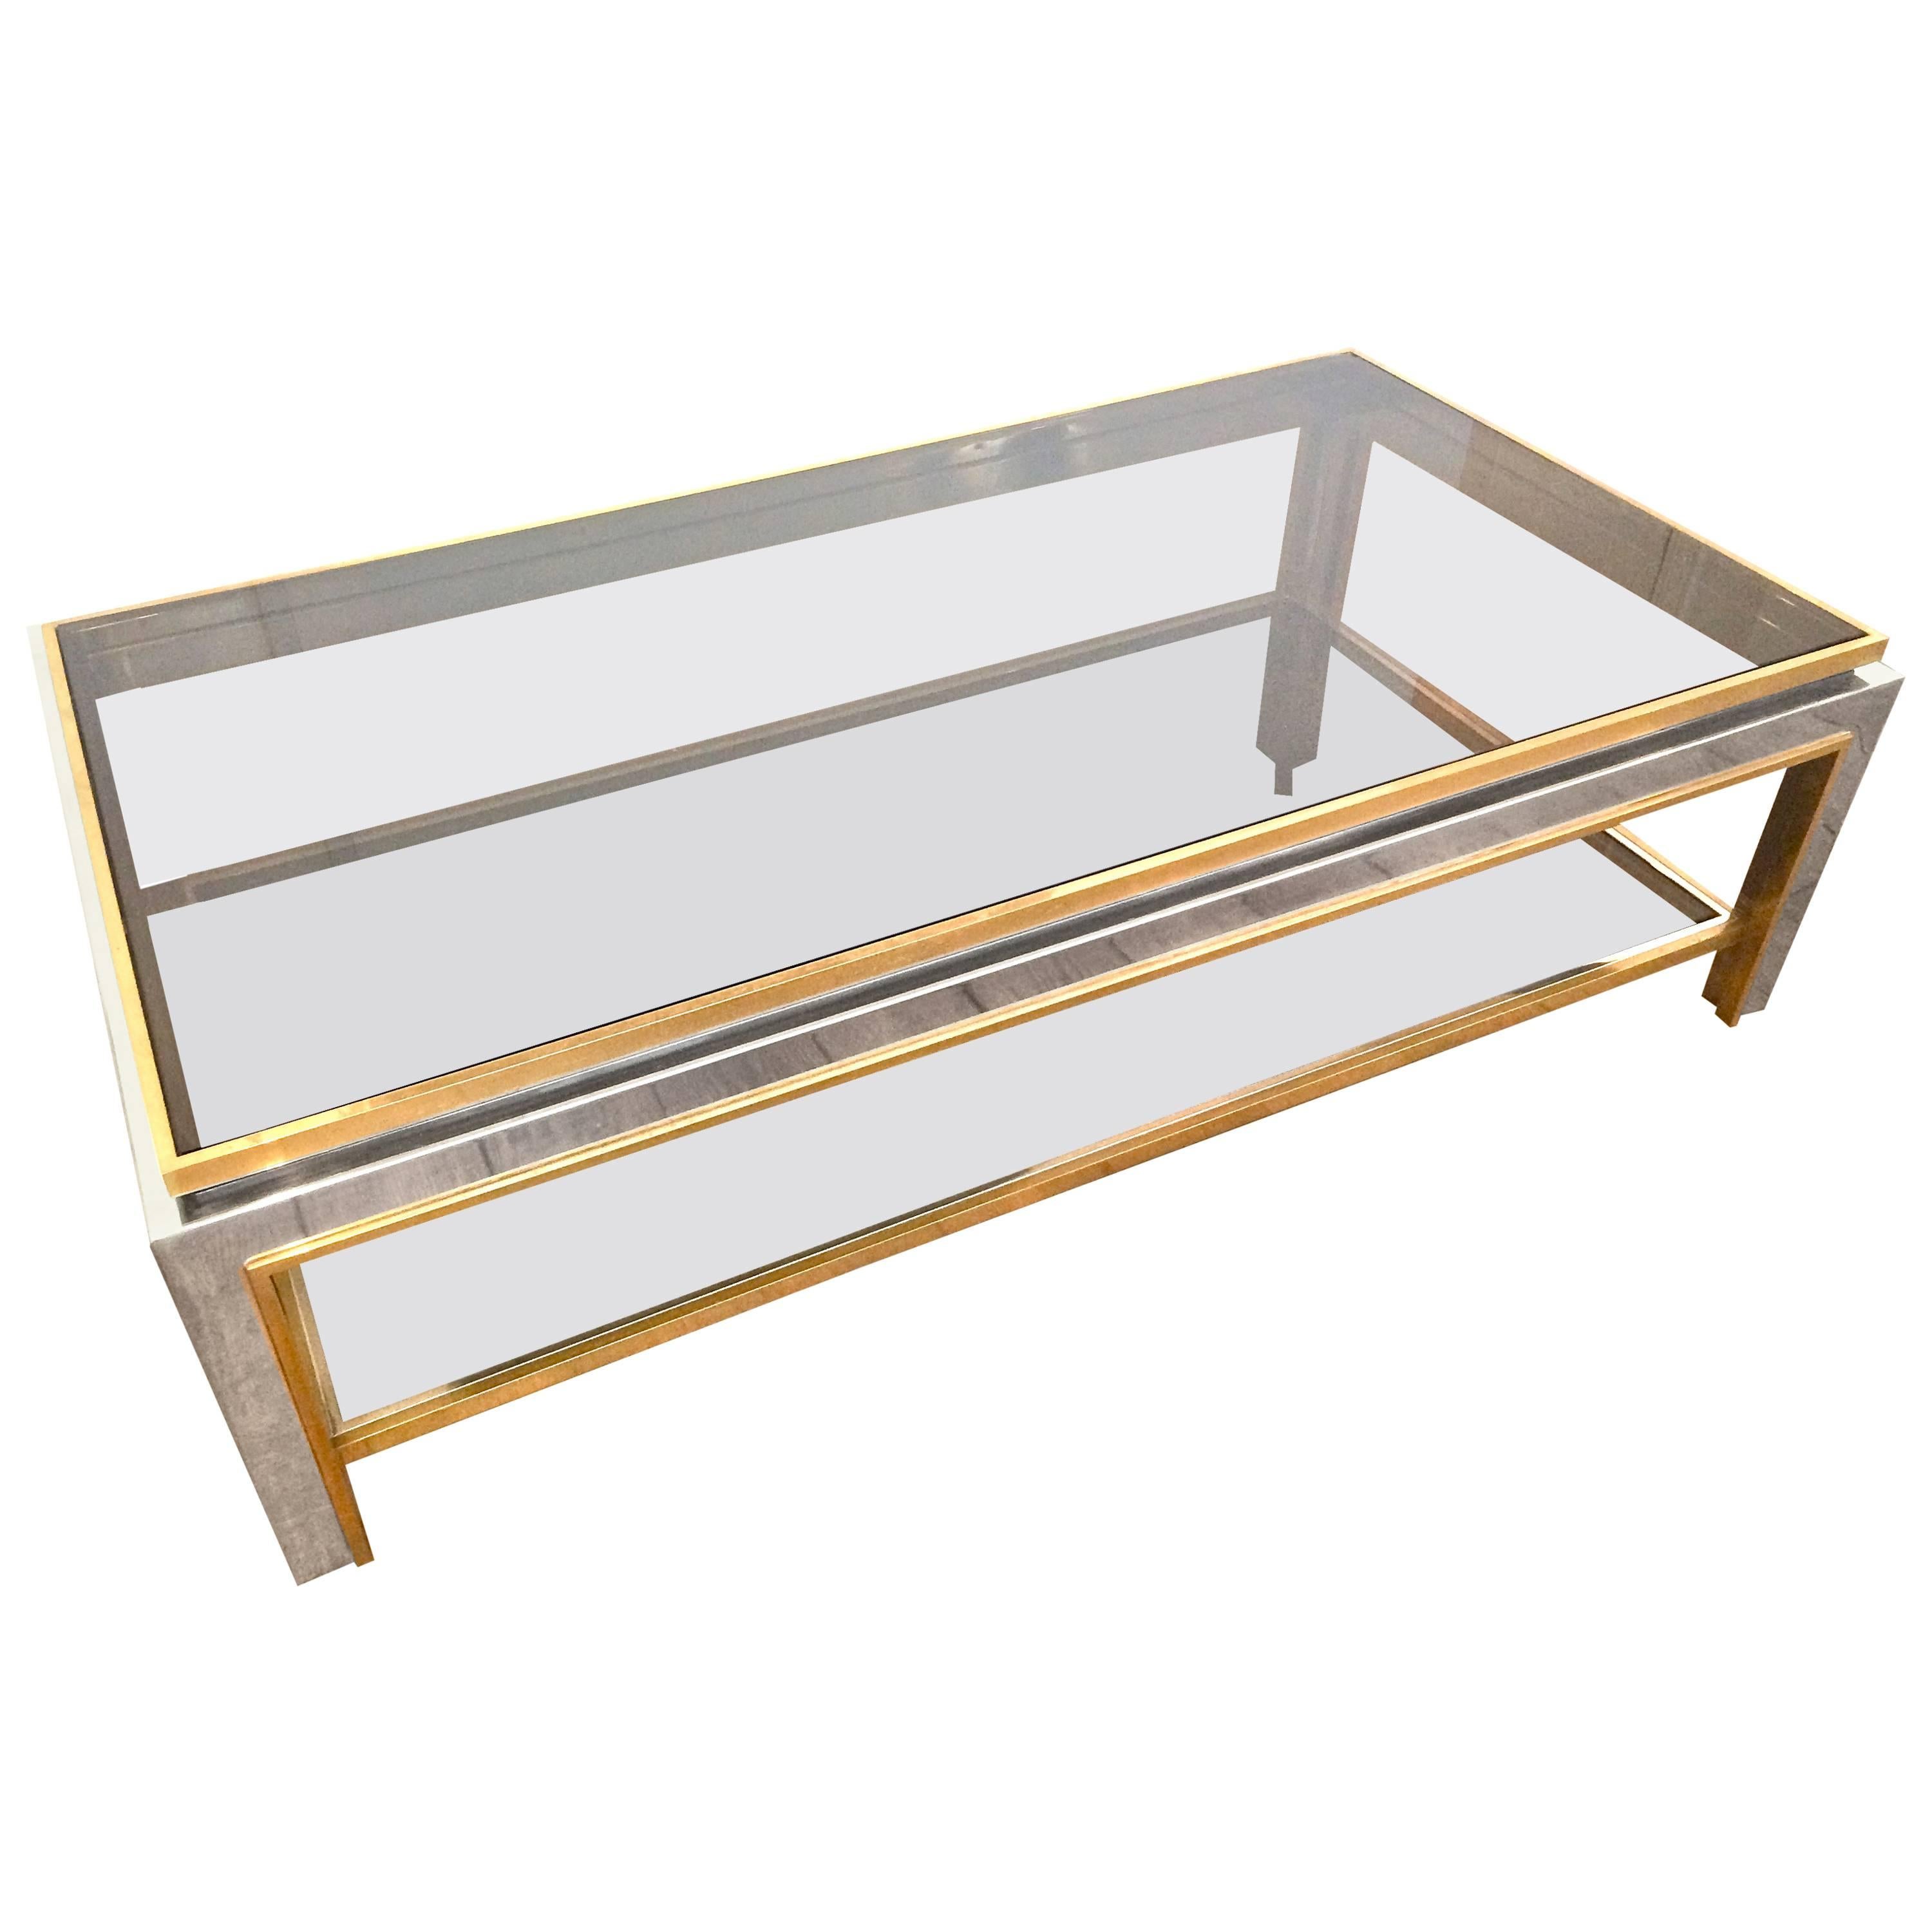 A Jean Charles 1970s polished chrome and brass Coffee Table with smoked glass 